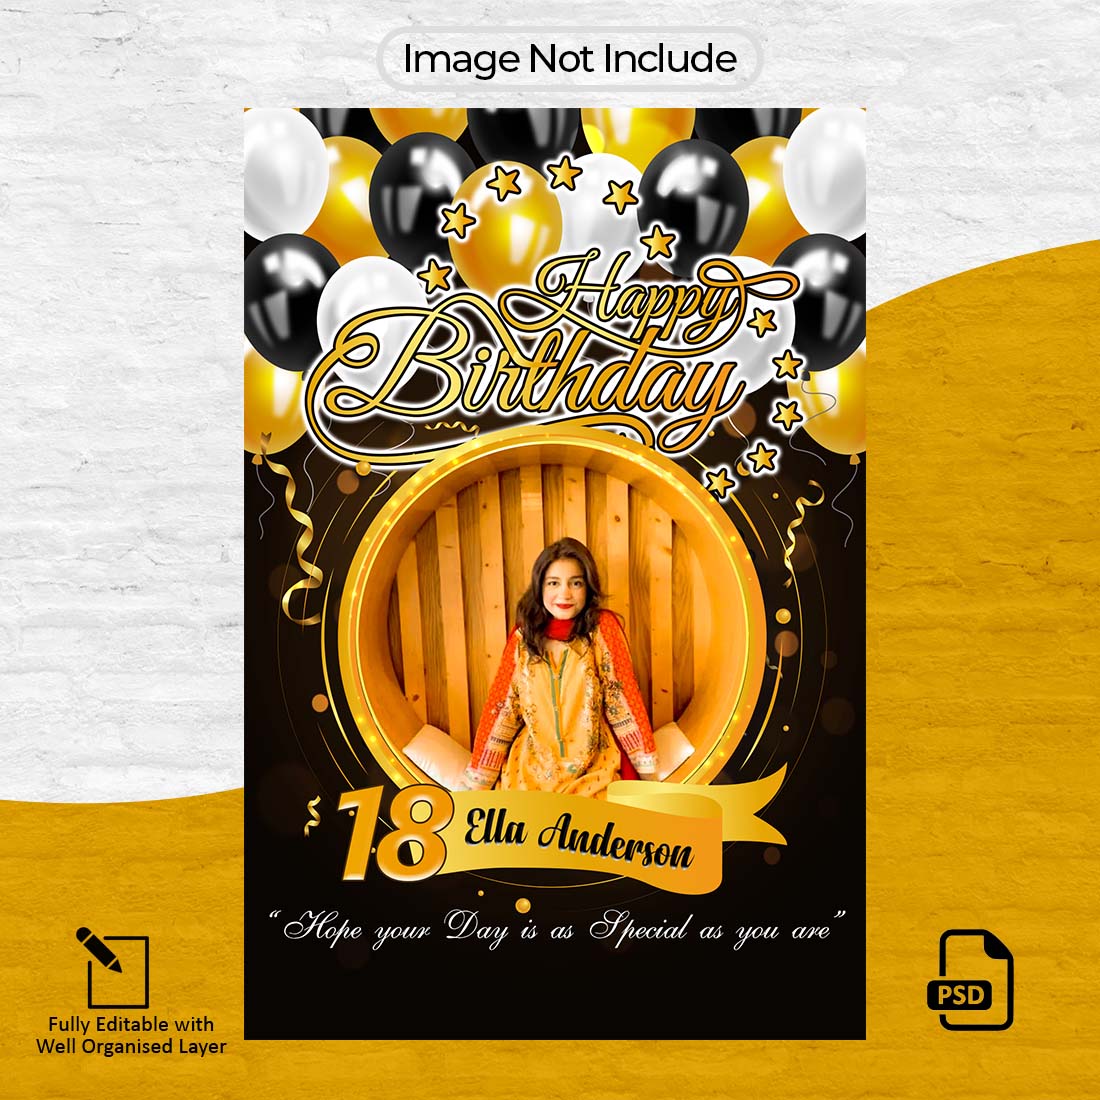 PSD Editable Sparkling Moments: Captivating Birthday Wishes for Social Media cover image.